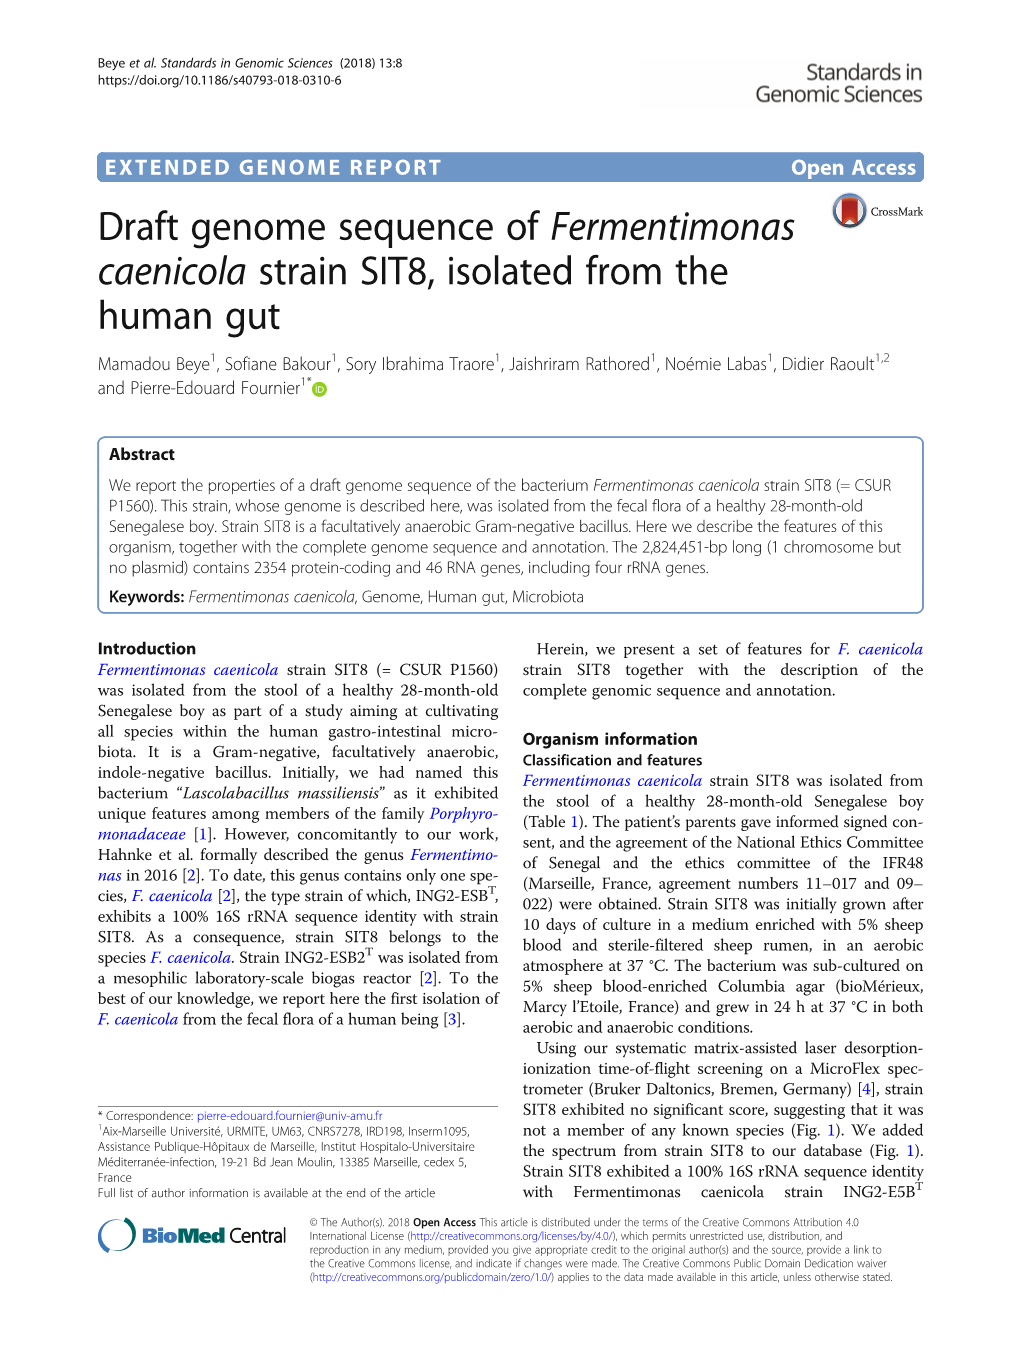 Draft Genome Sequence of Fermentimonas Caenicola Strain SIT8, Isolated from the Human